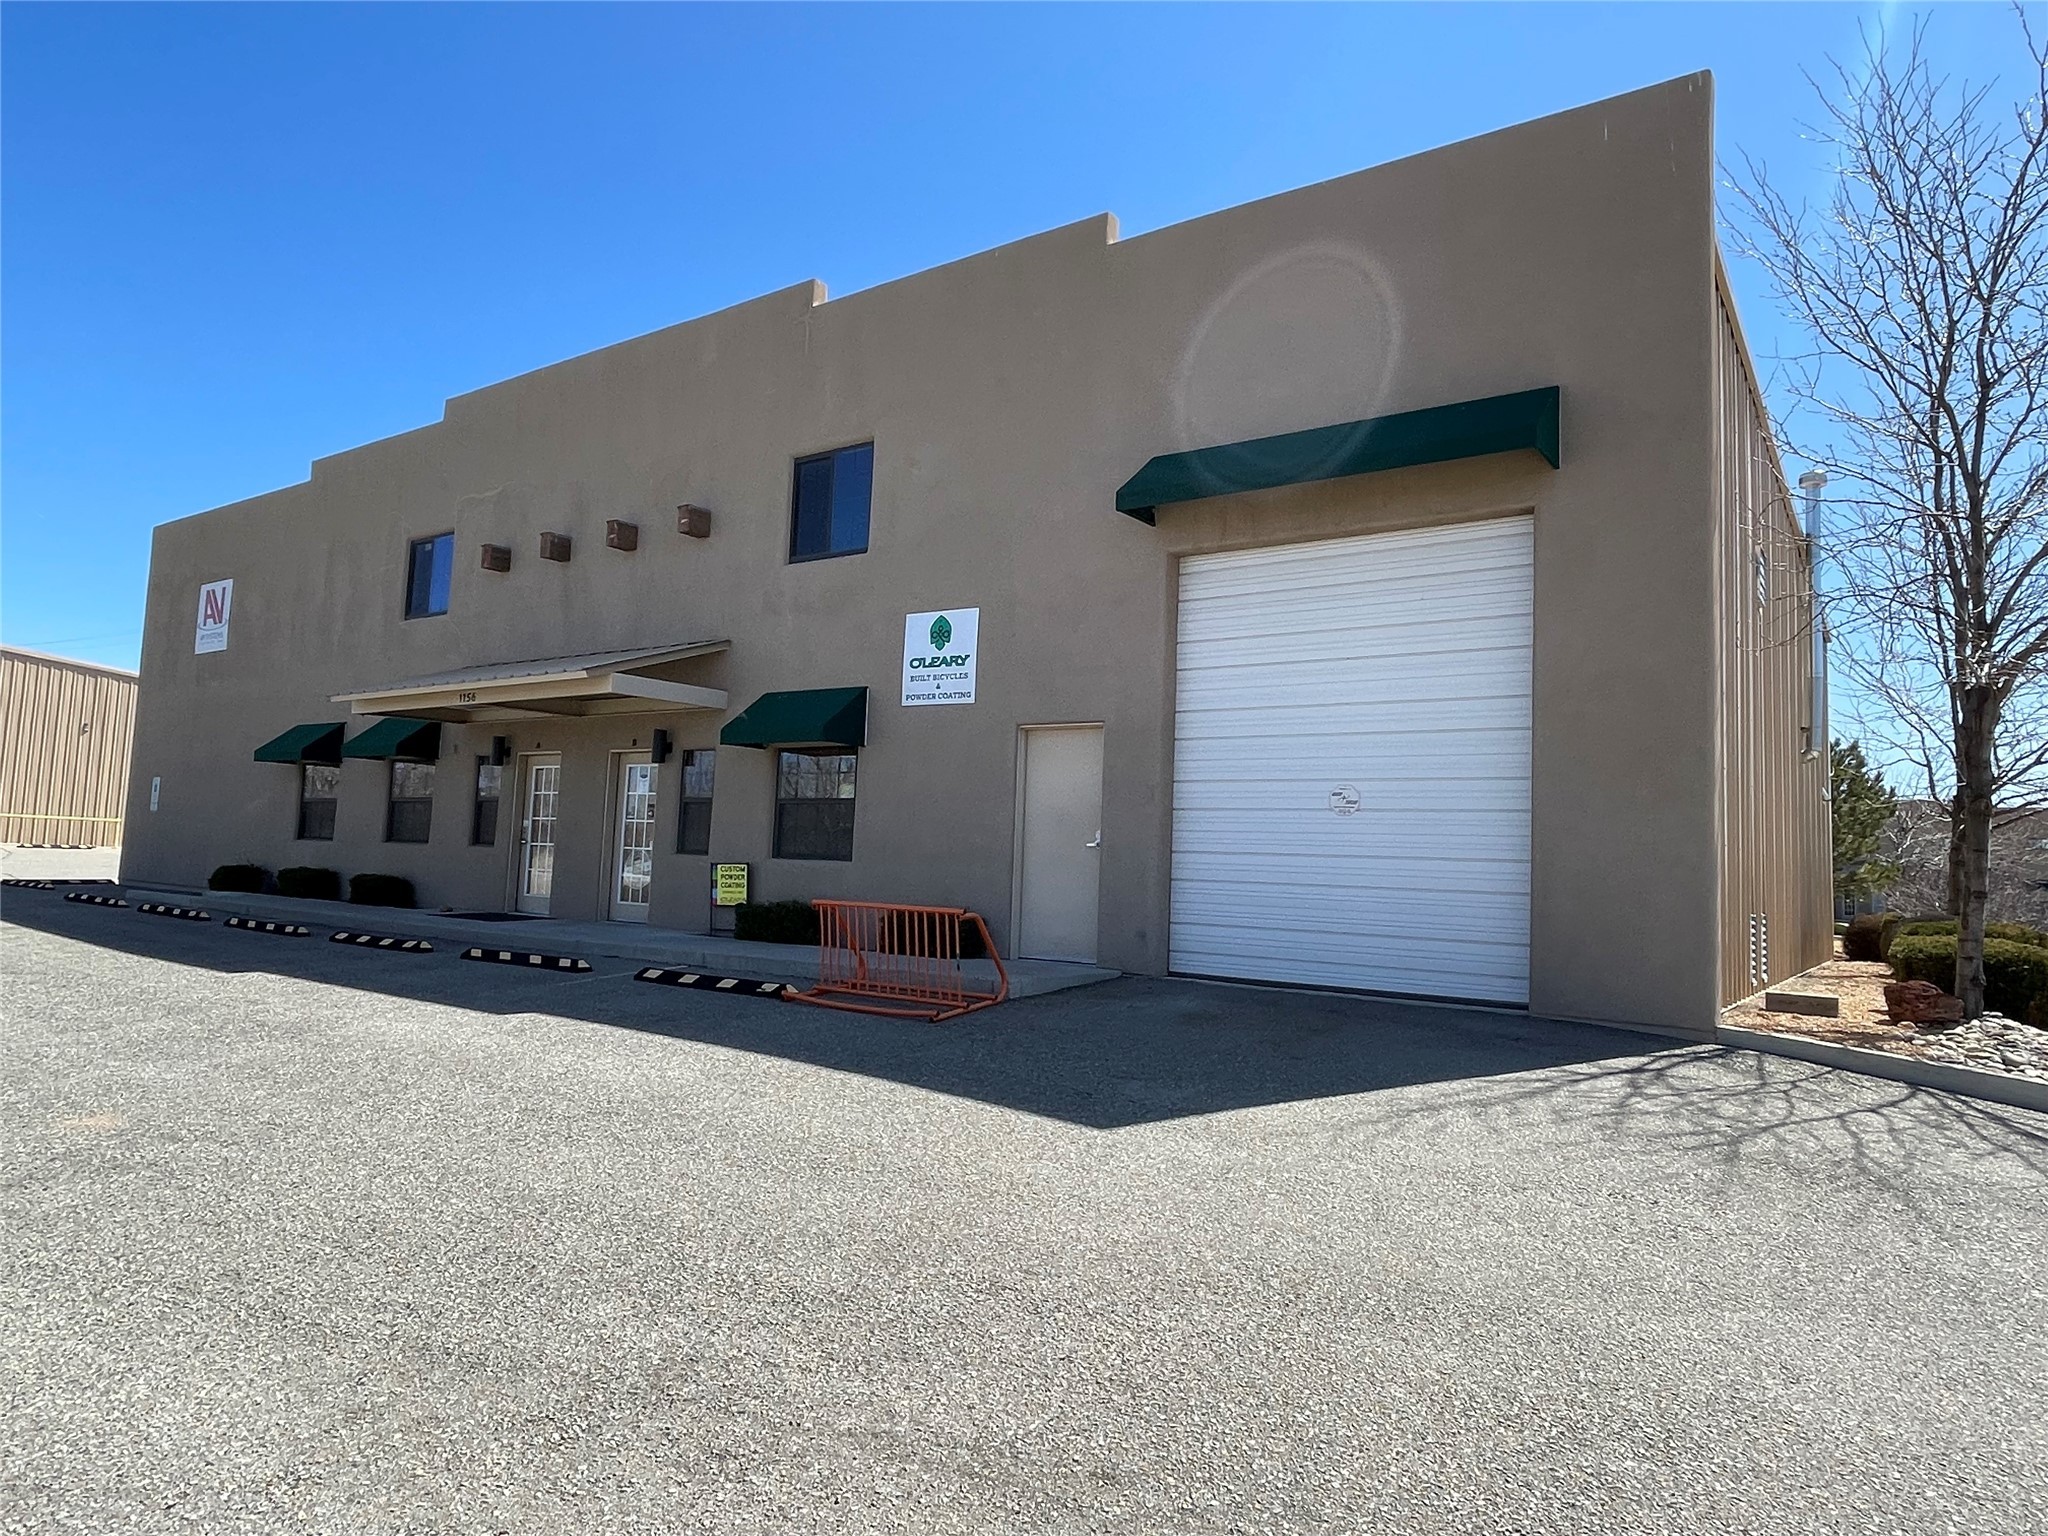 1156 Parkway Drive Suite B, Santa Fe, New Mexico 87507, ,Commercial Lease,For Rent,1156 Parkway Drive Suite B,202336297